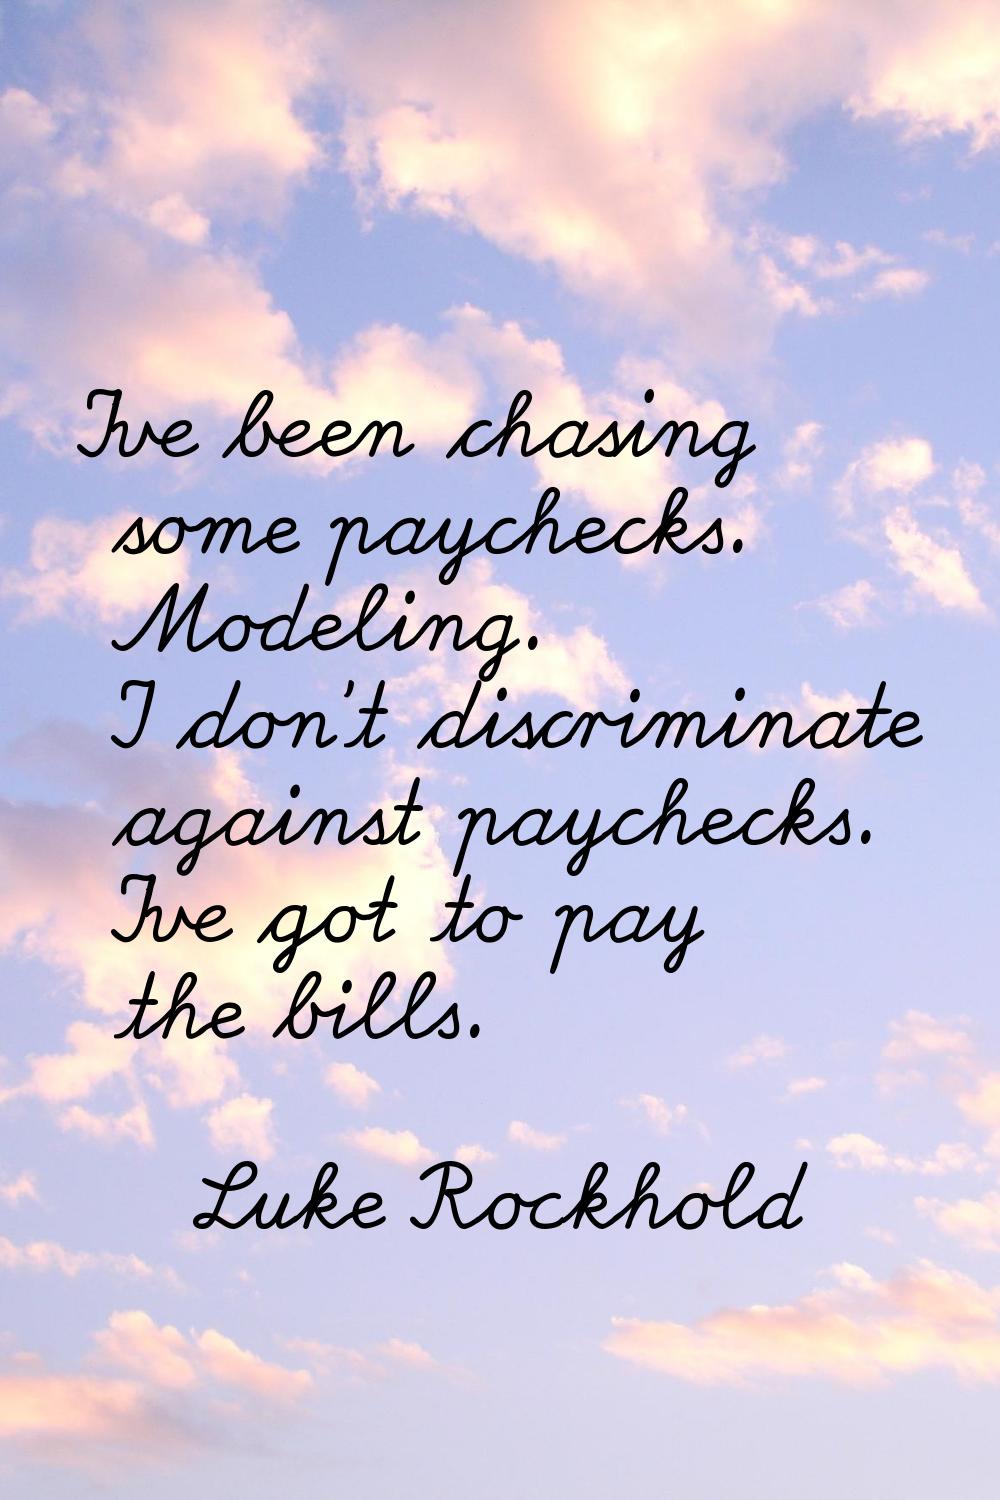 I've been chasing some paychecks. Modeling. I don't discriminate against paychecks. I've got to pay